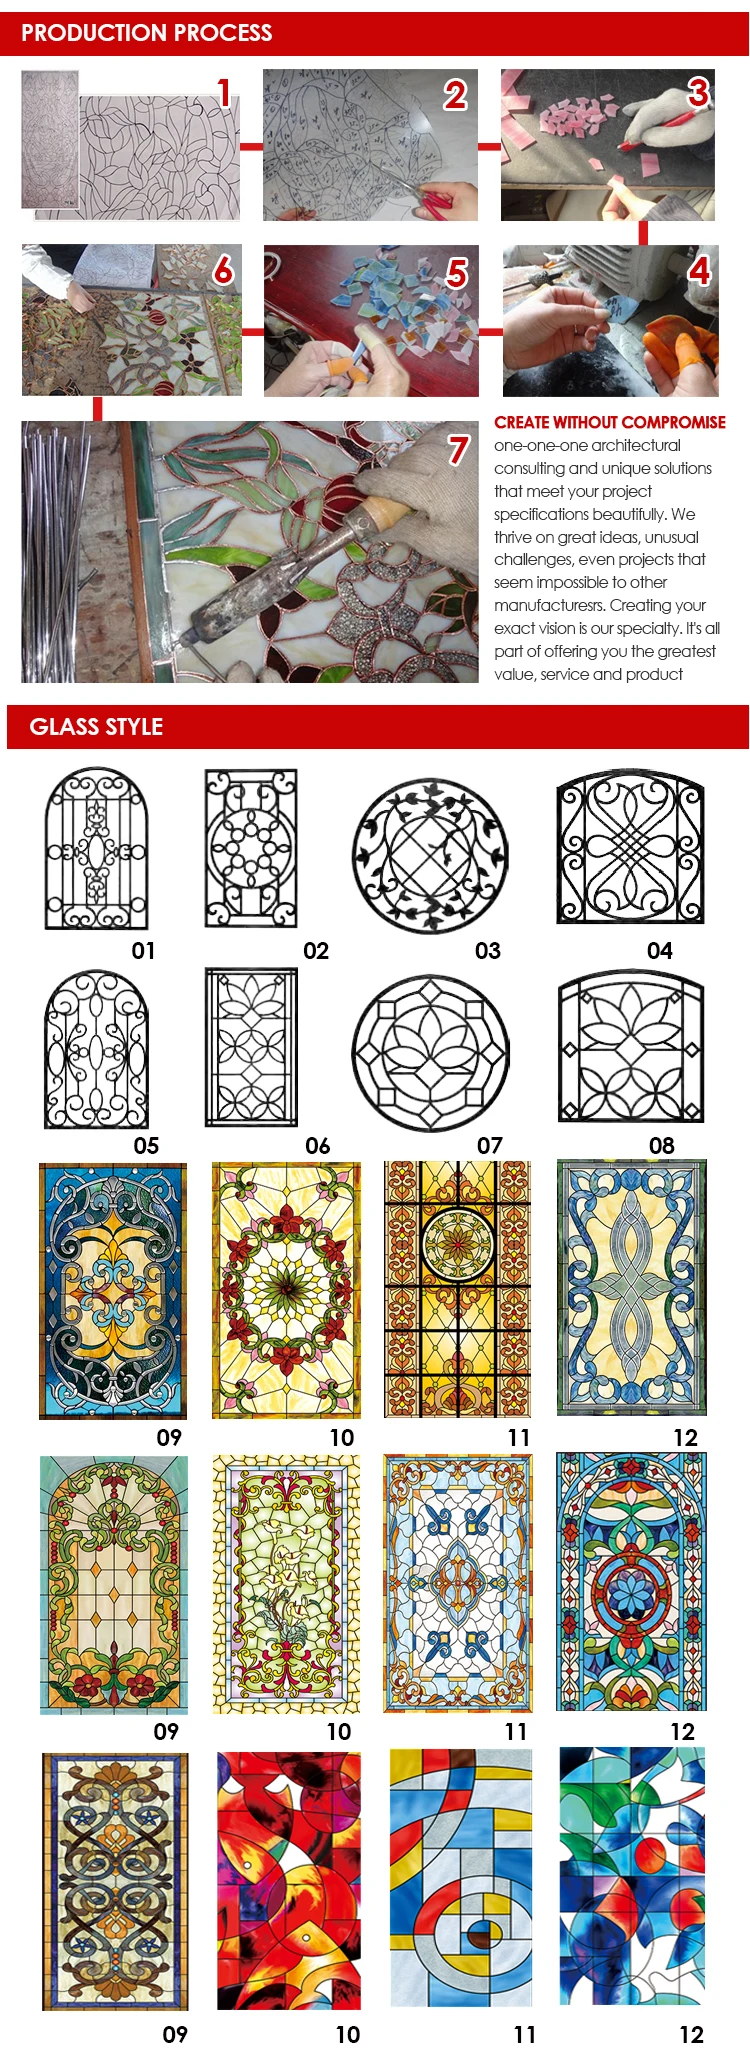 New York best selling wooden double glazed windows with stained glass